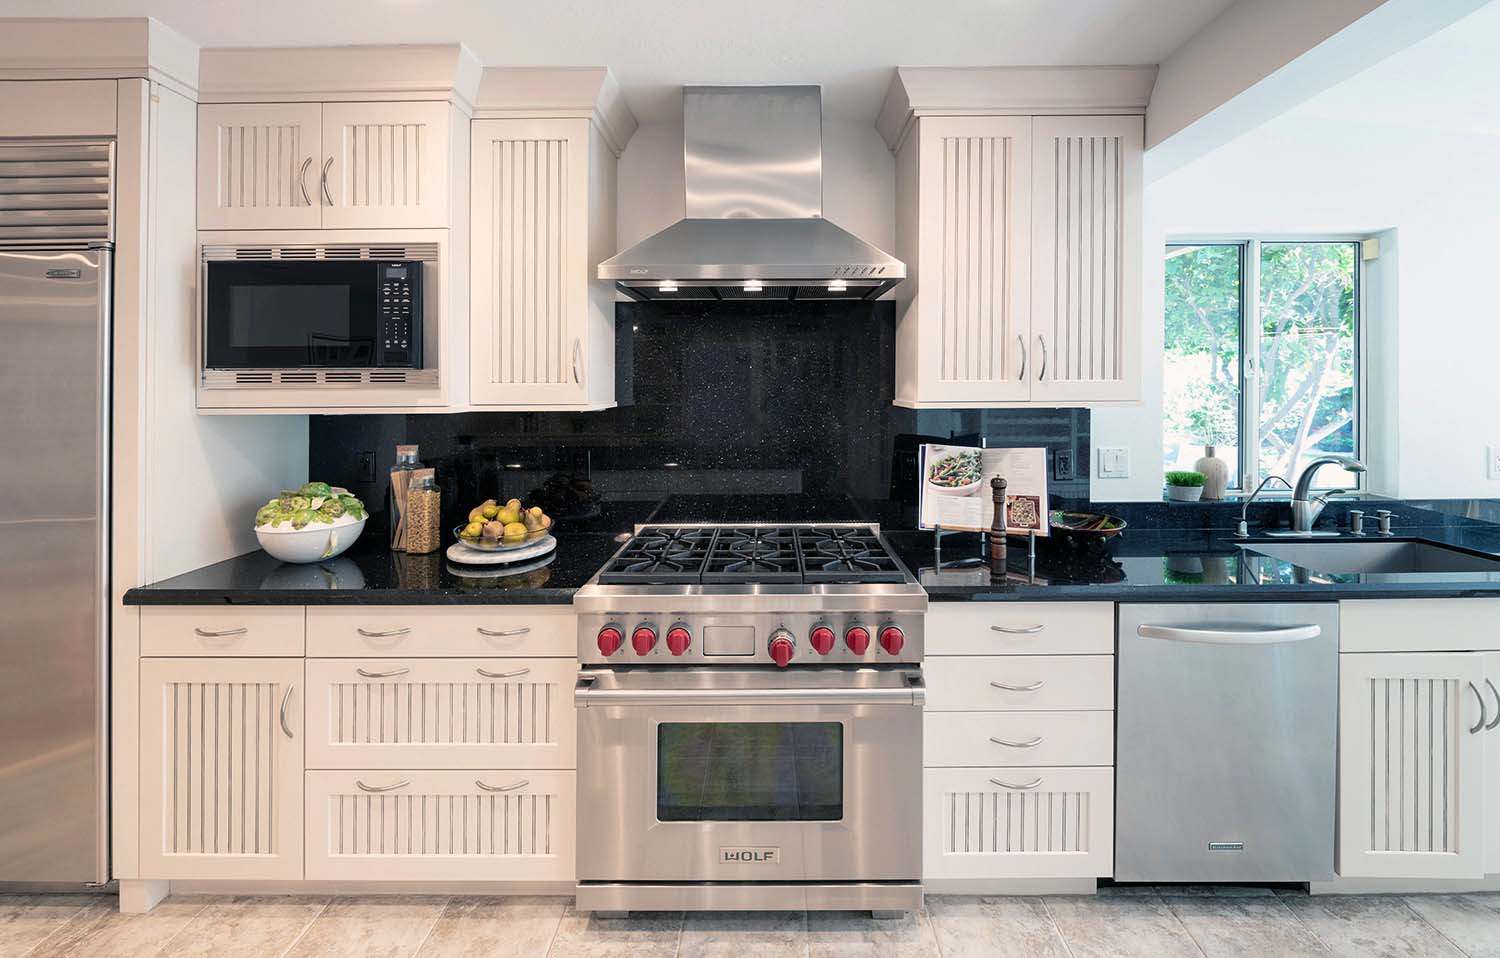 black granite backsplash and countertops with a wolf stove